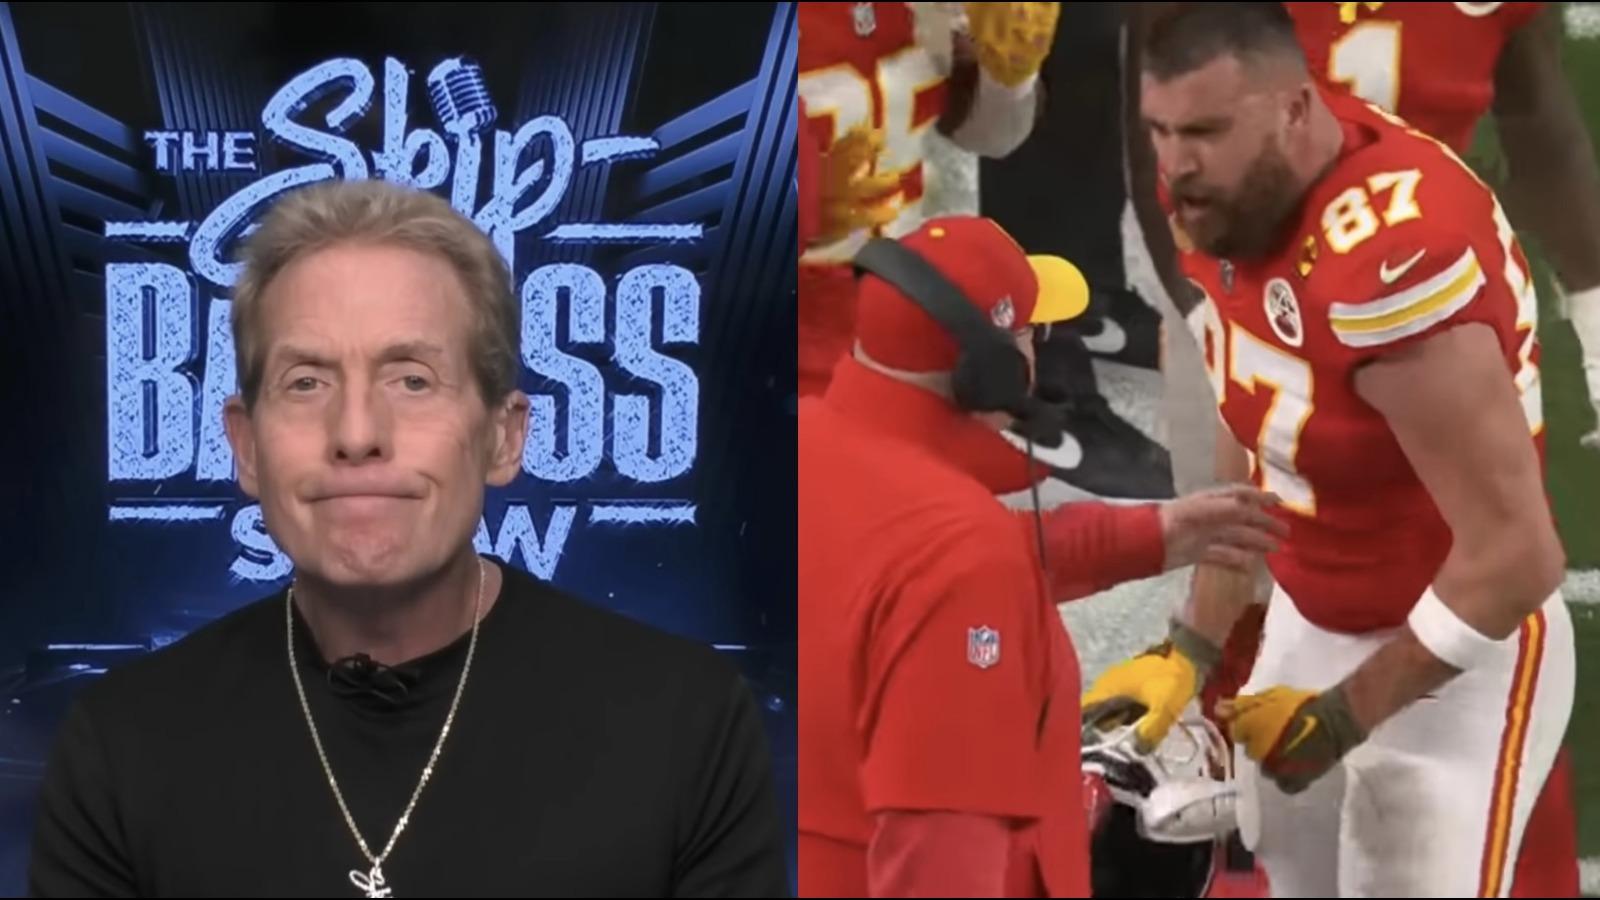 Skip Bayless criticized Andy Reid for his handling of the Travis Kelce Super Bowl incident